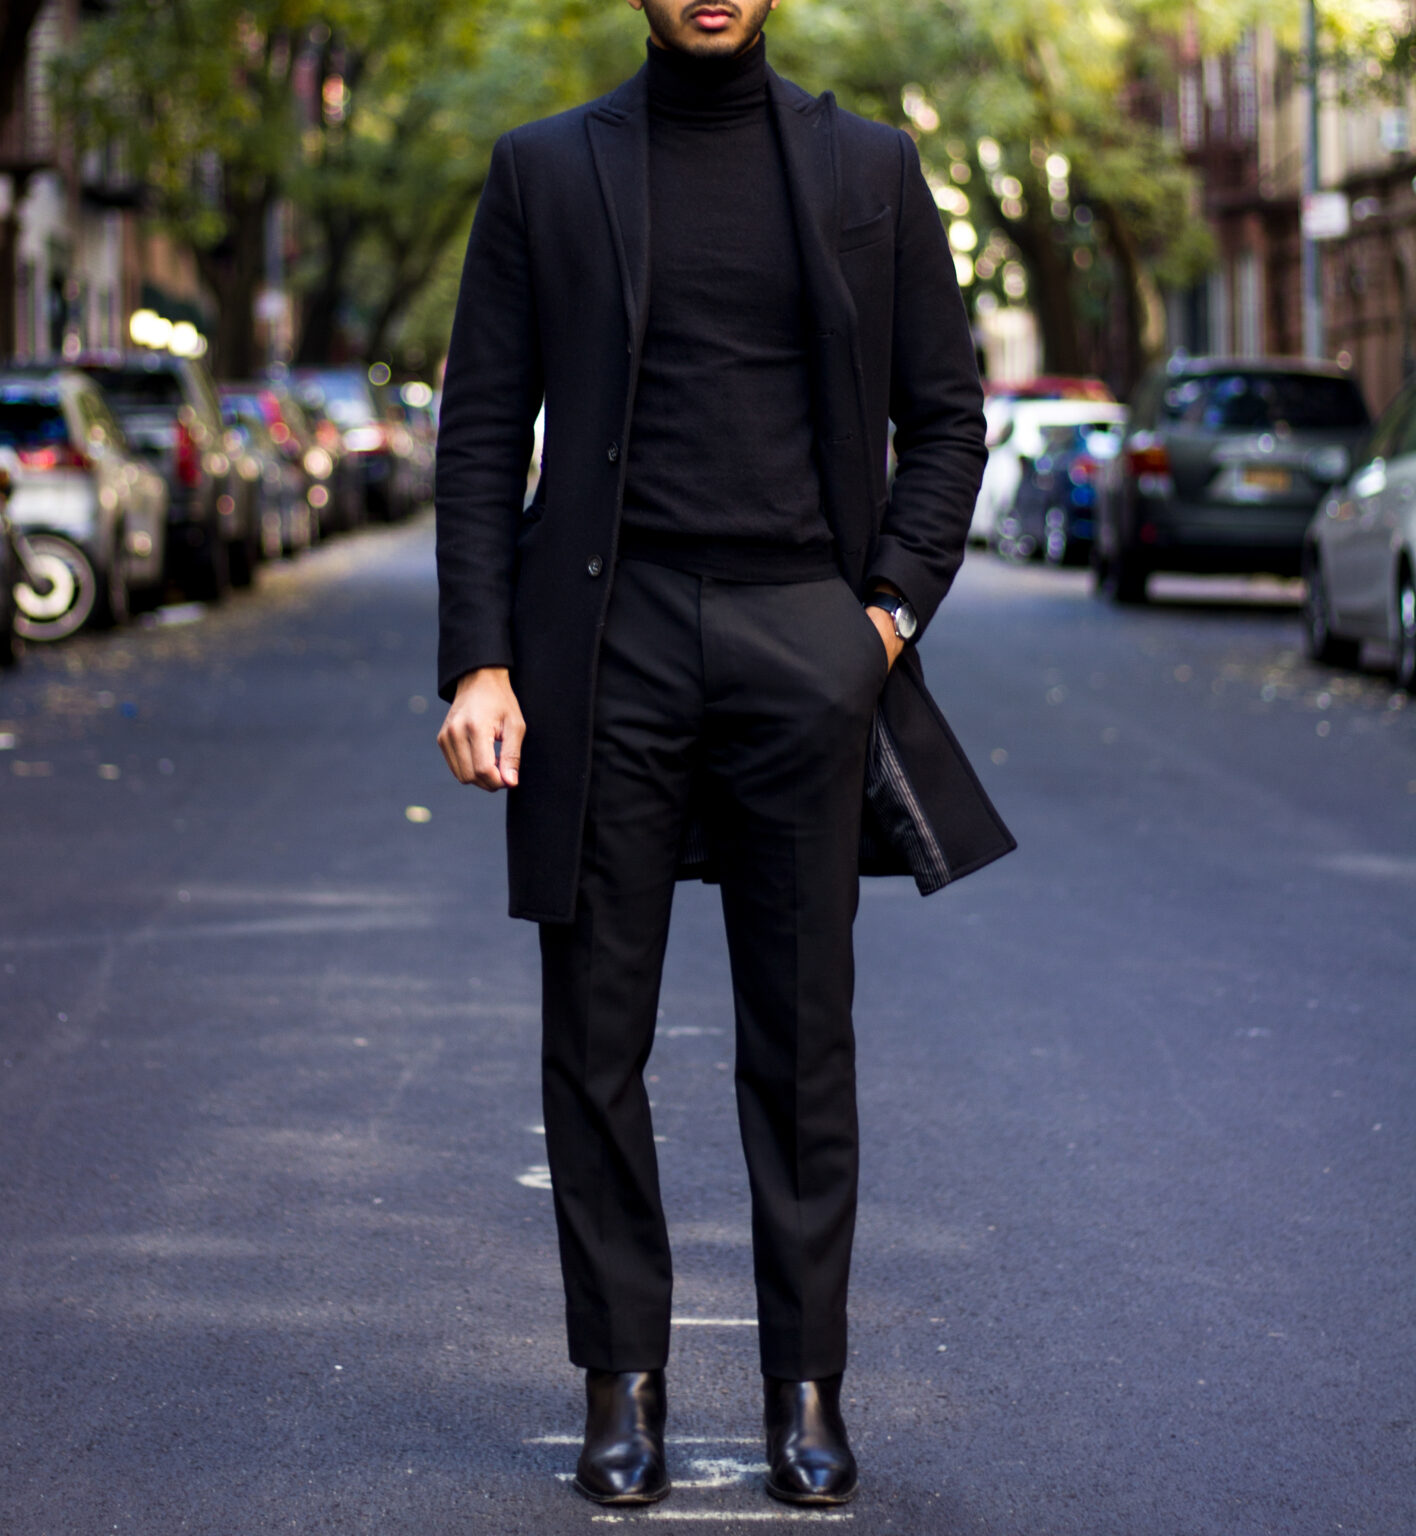 7 Turtleneck Outfit Ideas That Look Amazing (For Men) - Magic of Clothes